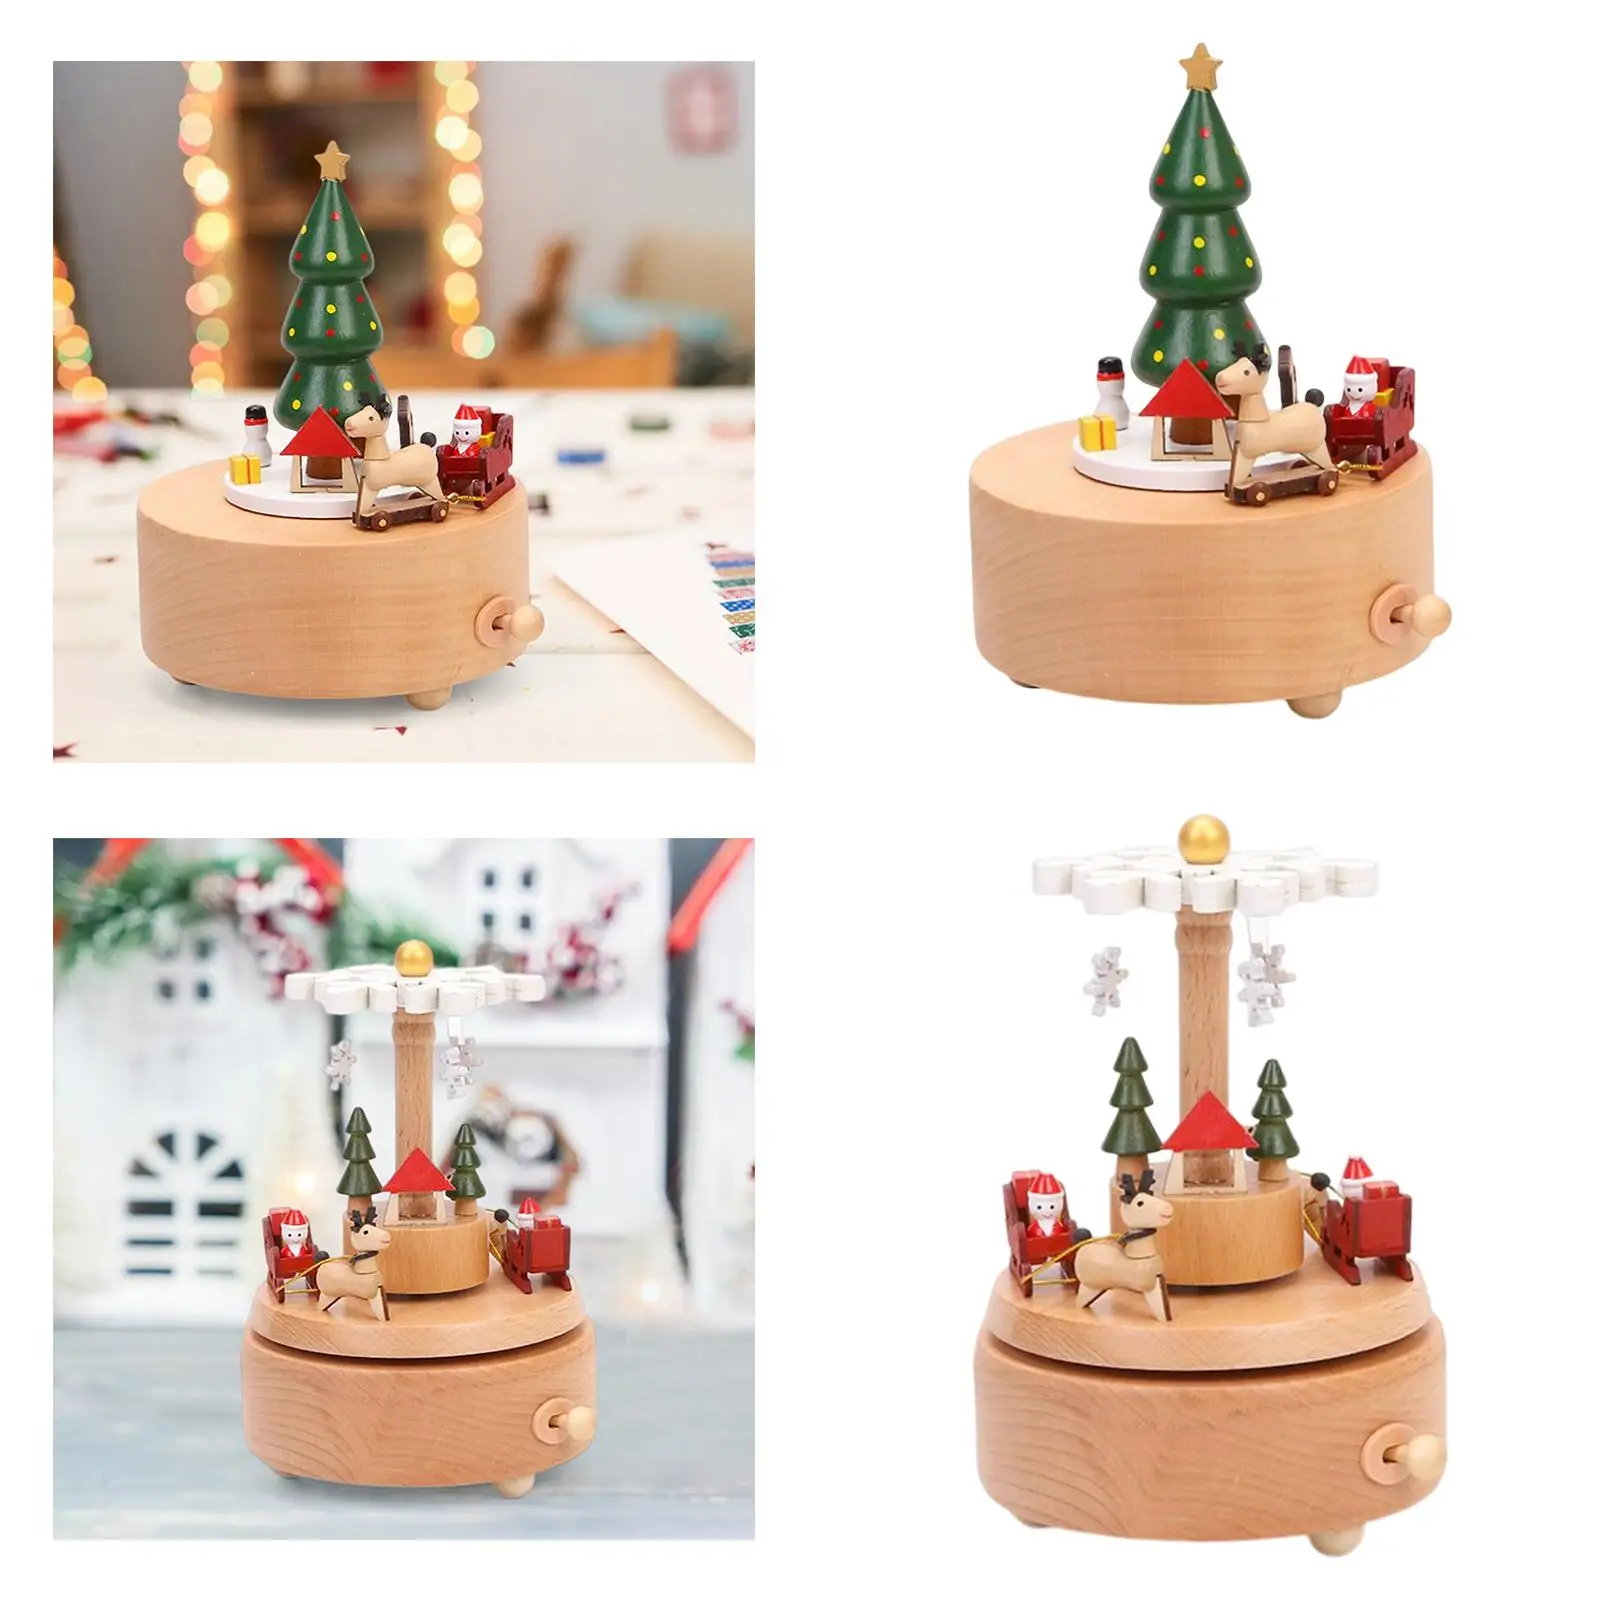 Creative Christmas Music Box Rotating Musical Box Carousel Toy Crafts for Indoor Desktop Decor Ornament Birthday Gift